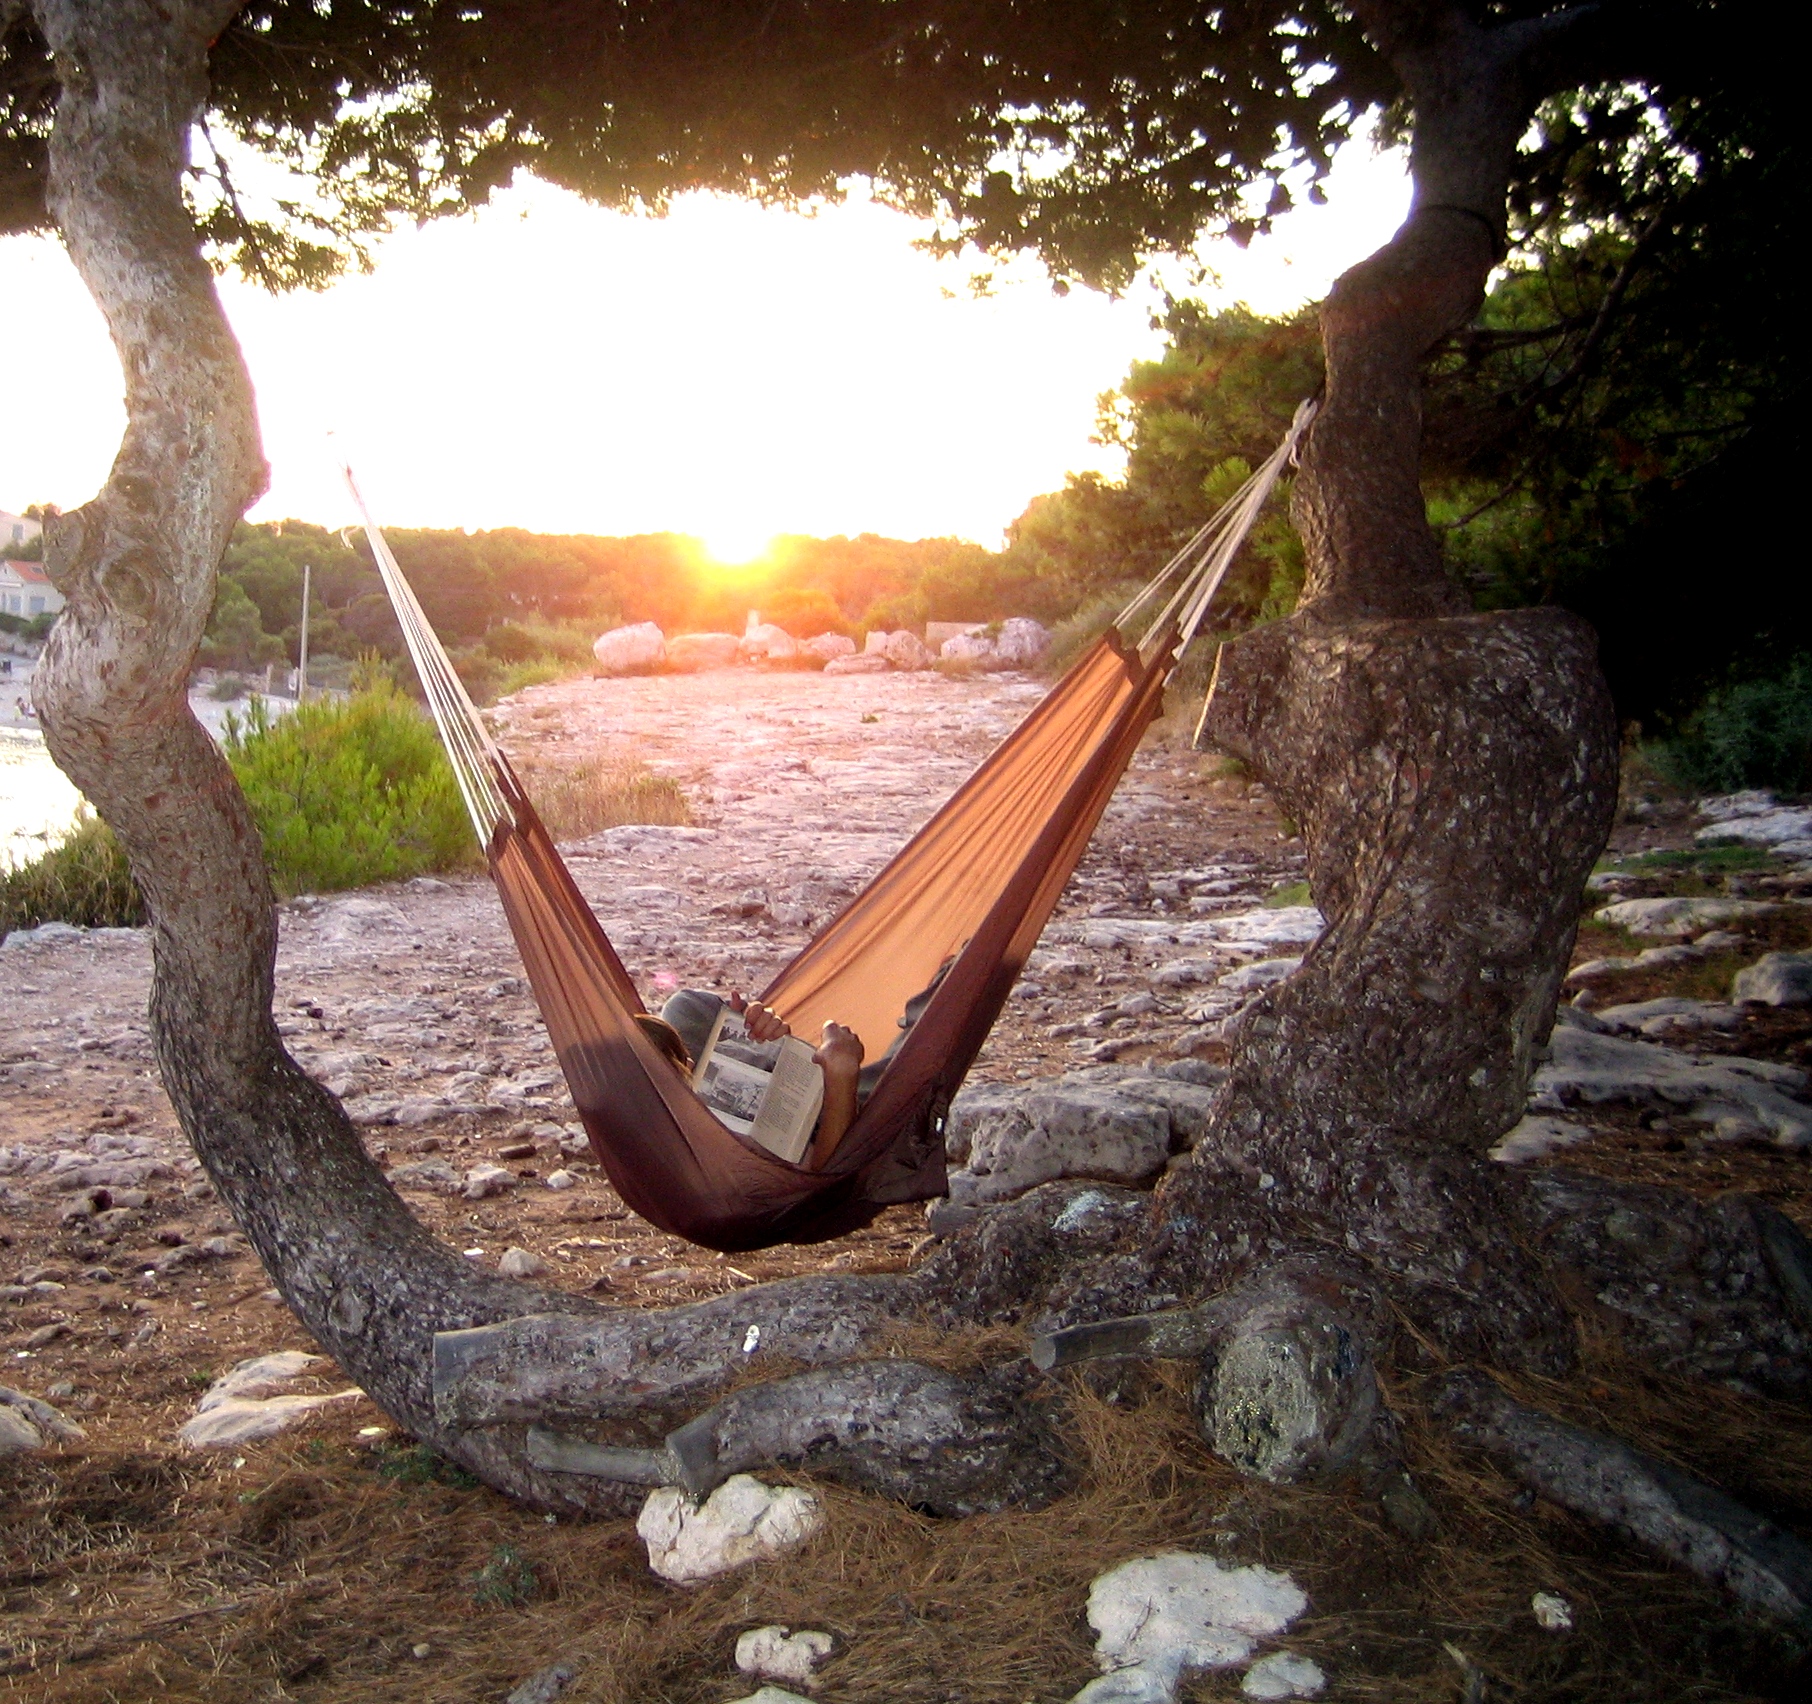 a hammock in the tree with a view of a rocky river at sunset